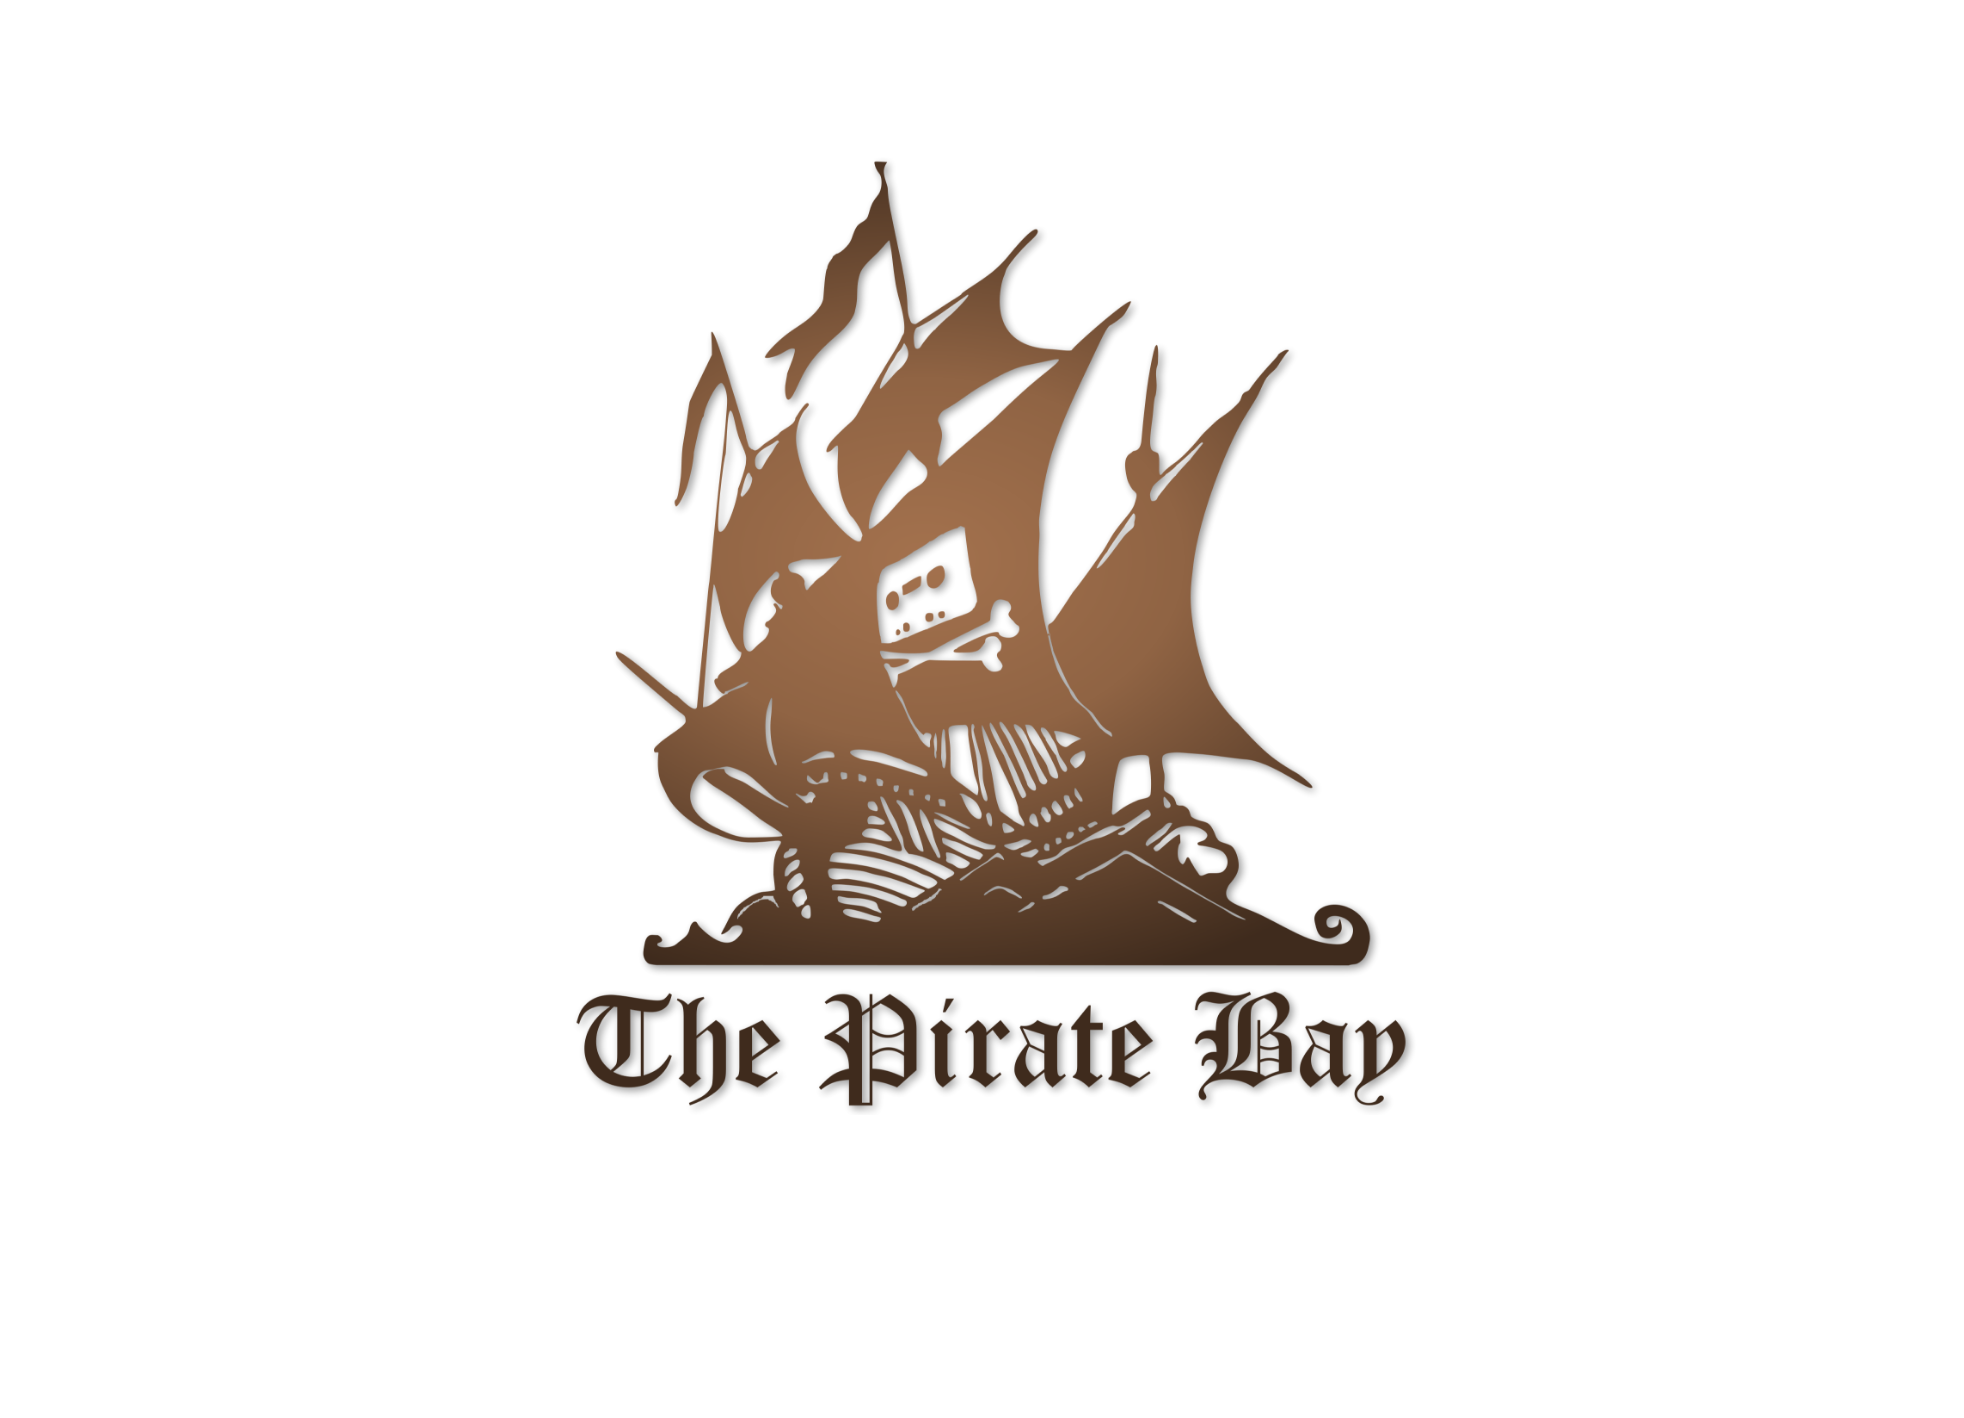 How To Download From Pirate Bays